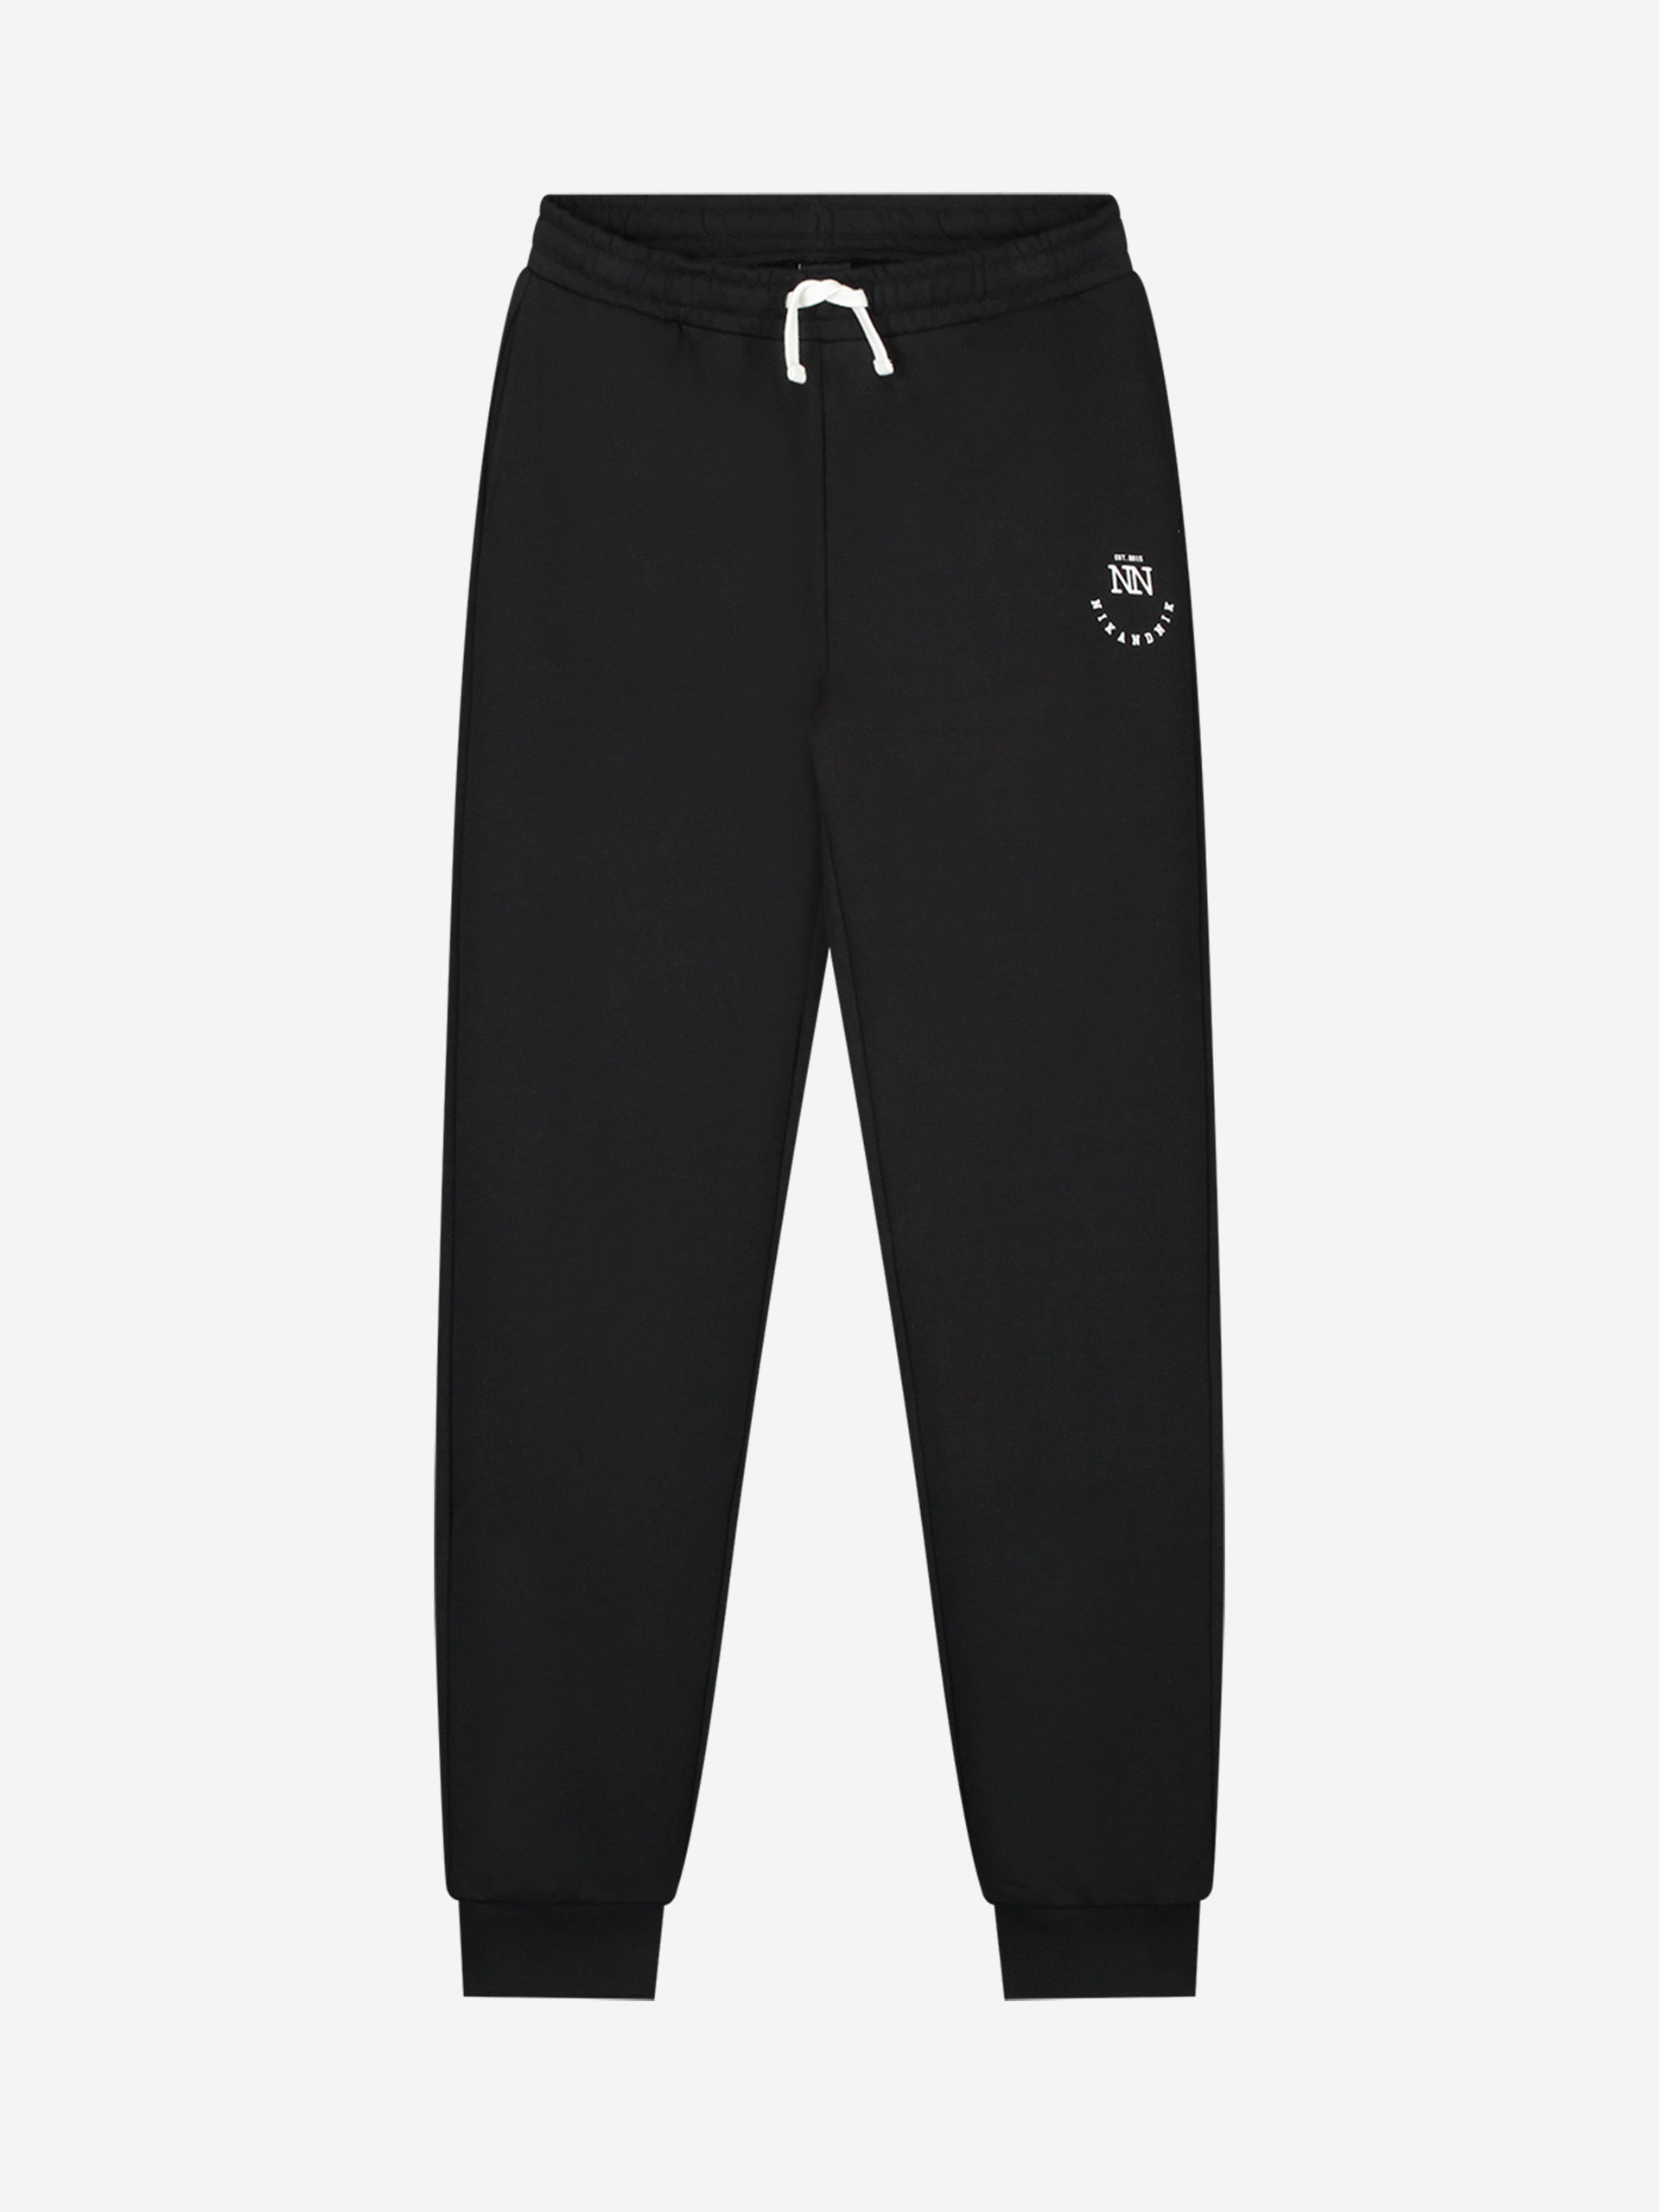  Sweatpants with high rise